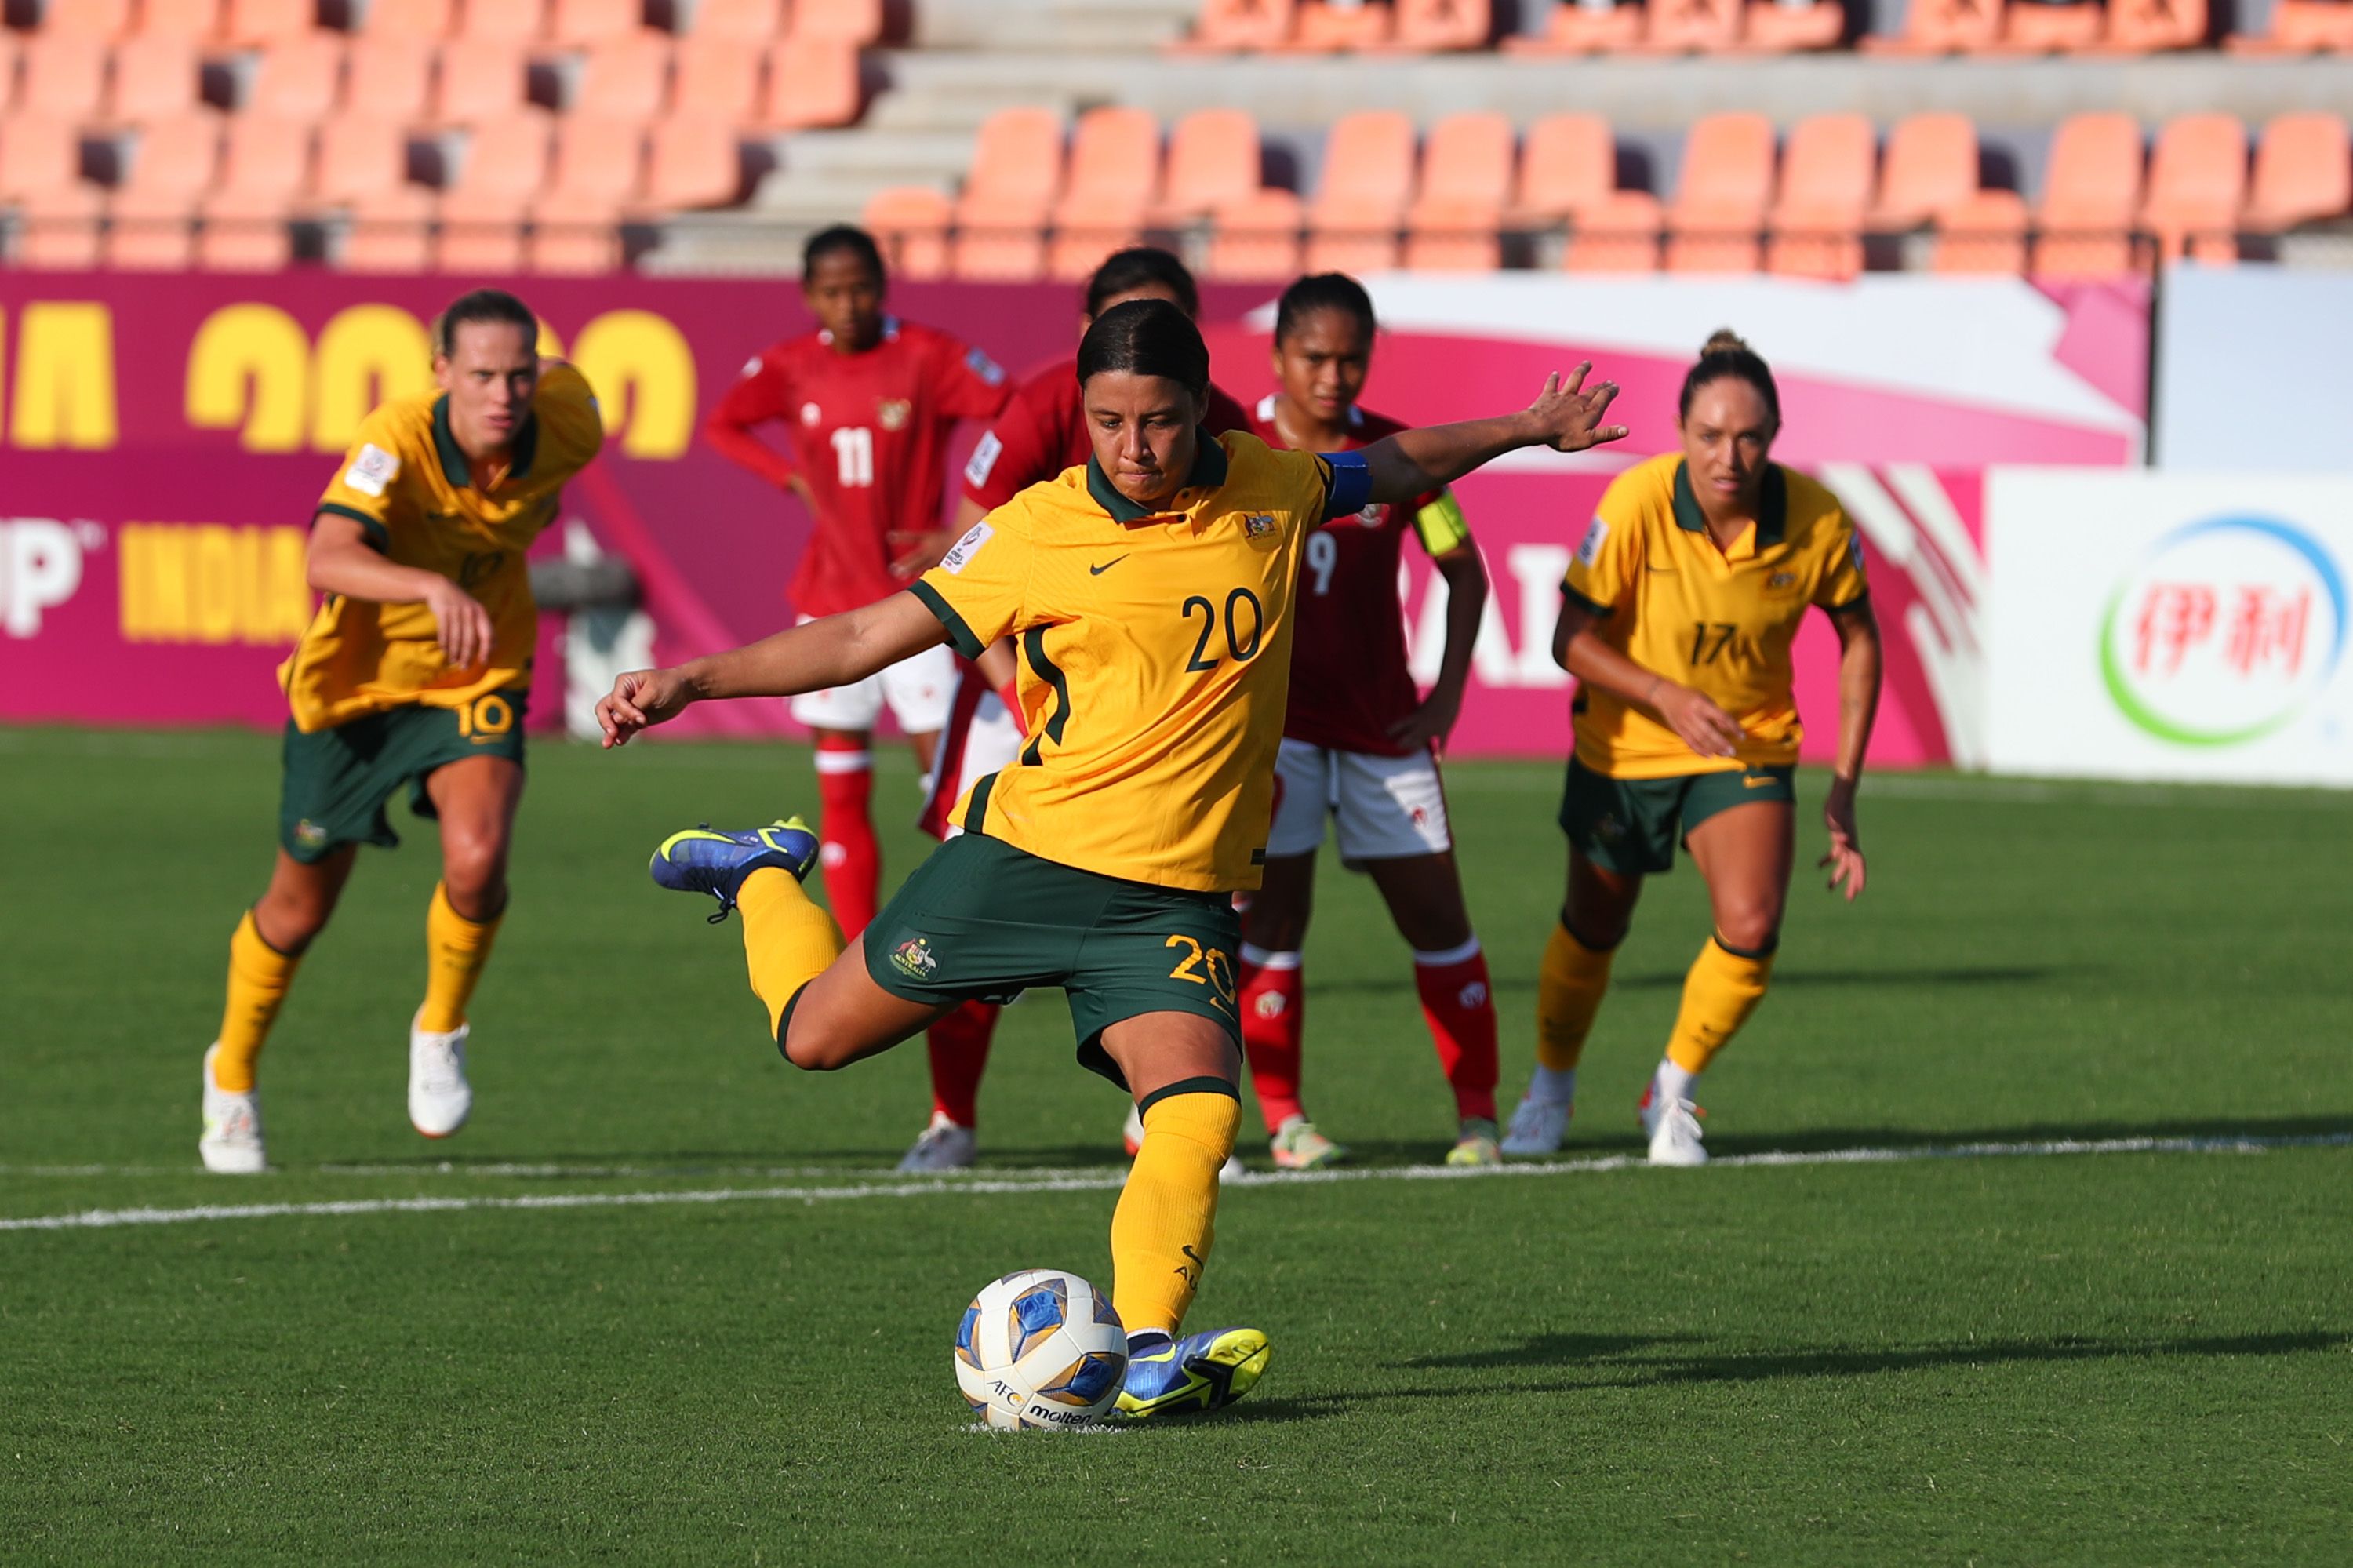 Matildas cop COVID-19 scare during dominant Asian Cup campaign